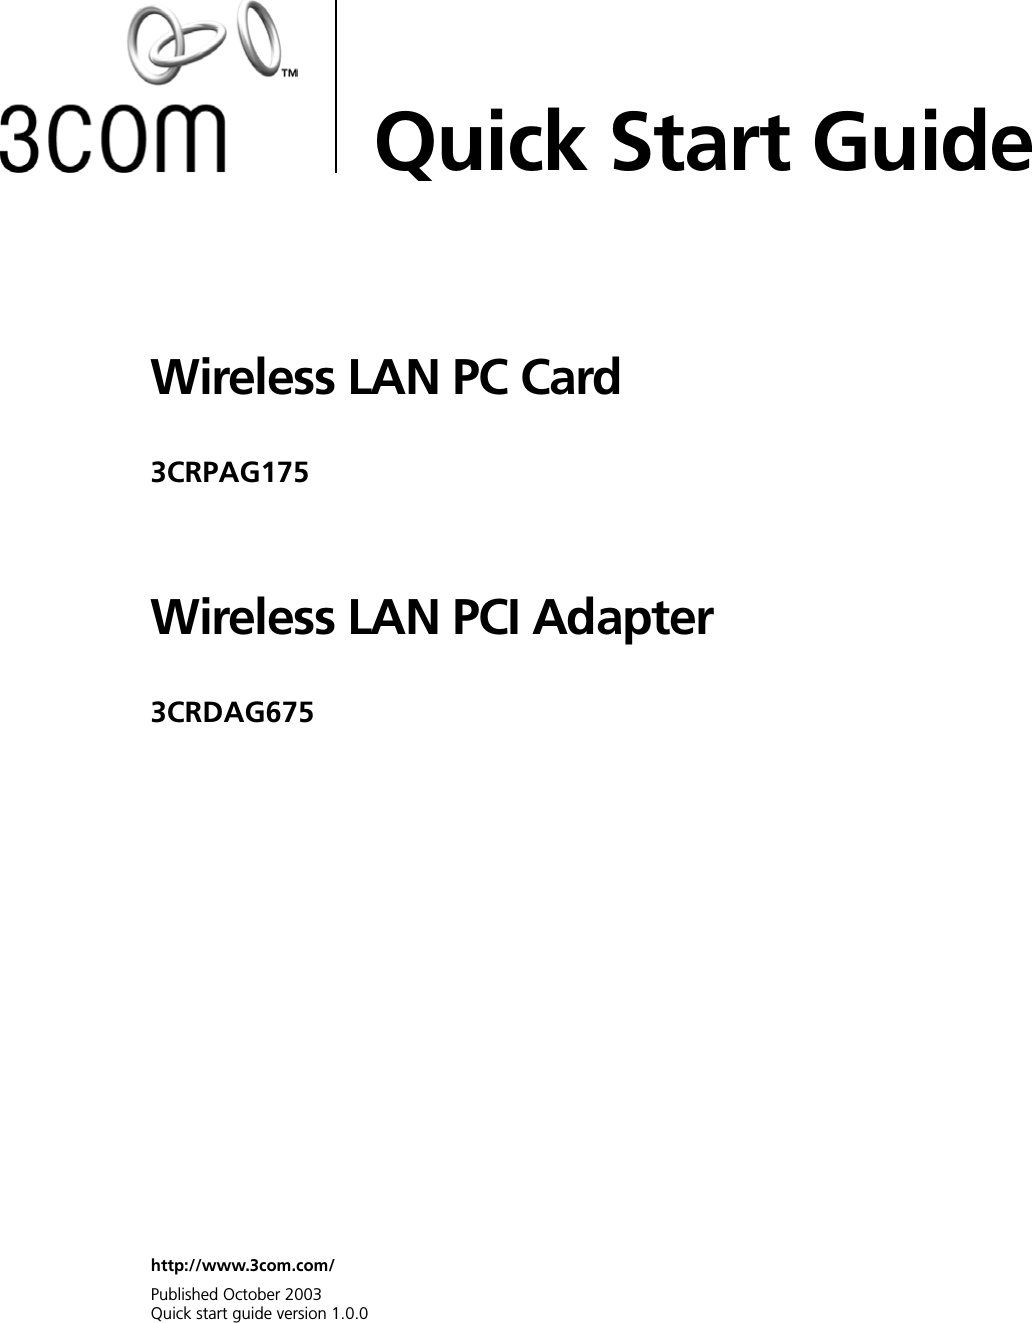 Wireless LAN PC Card3CRPAG175Wireless LAN PCI Adapter3CRDAG675Quick Start Guidehttp://www.3com.com/Published October 2003Quick start guide version 1.0.0